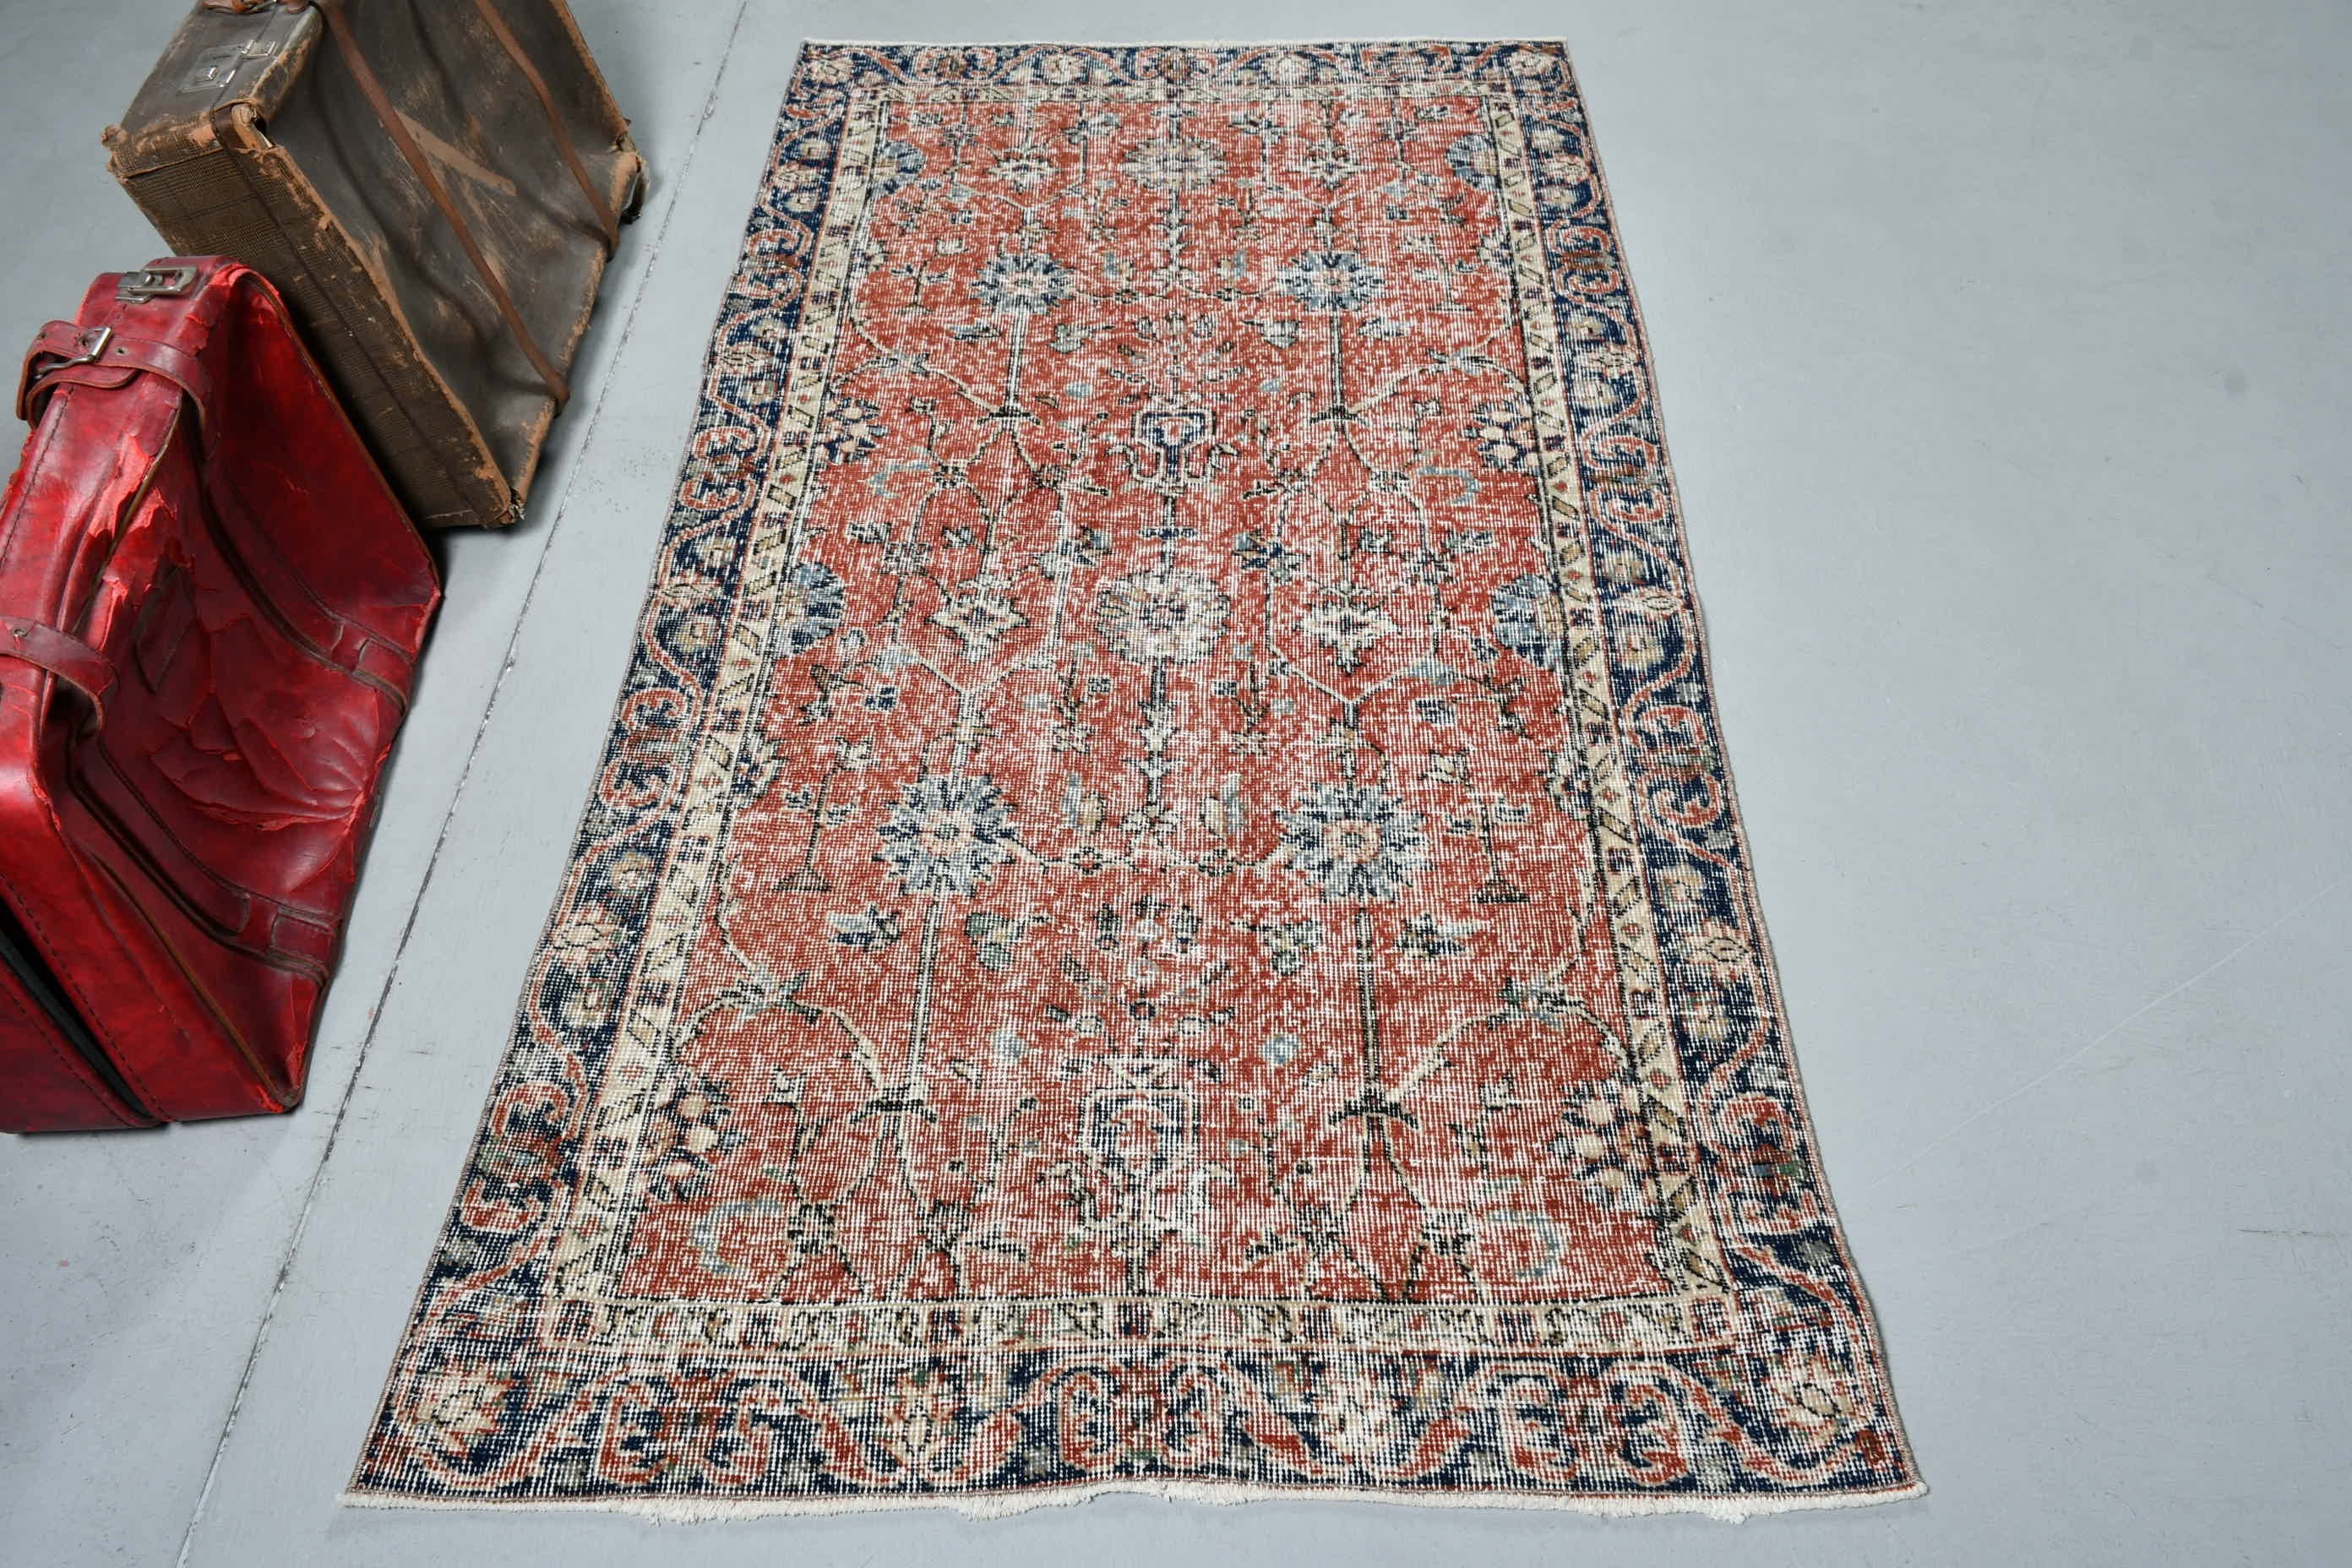 Vintage Rug, Bedroom Rug, Moroccan Rug, Nursery Rug, Rugs for Entry, Red Kitchen Rug, Turkish Rugs, 3.4x6.6 ft Accent Rugs